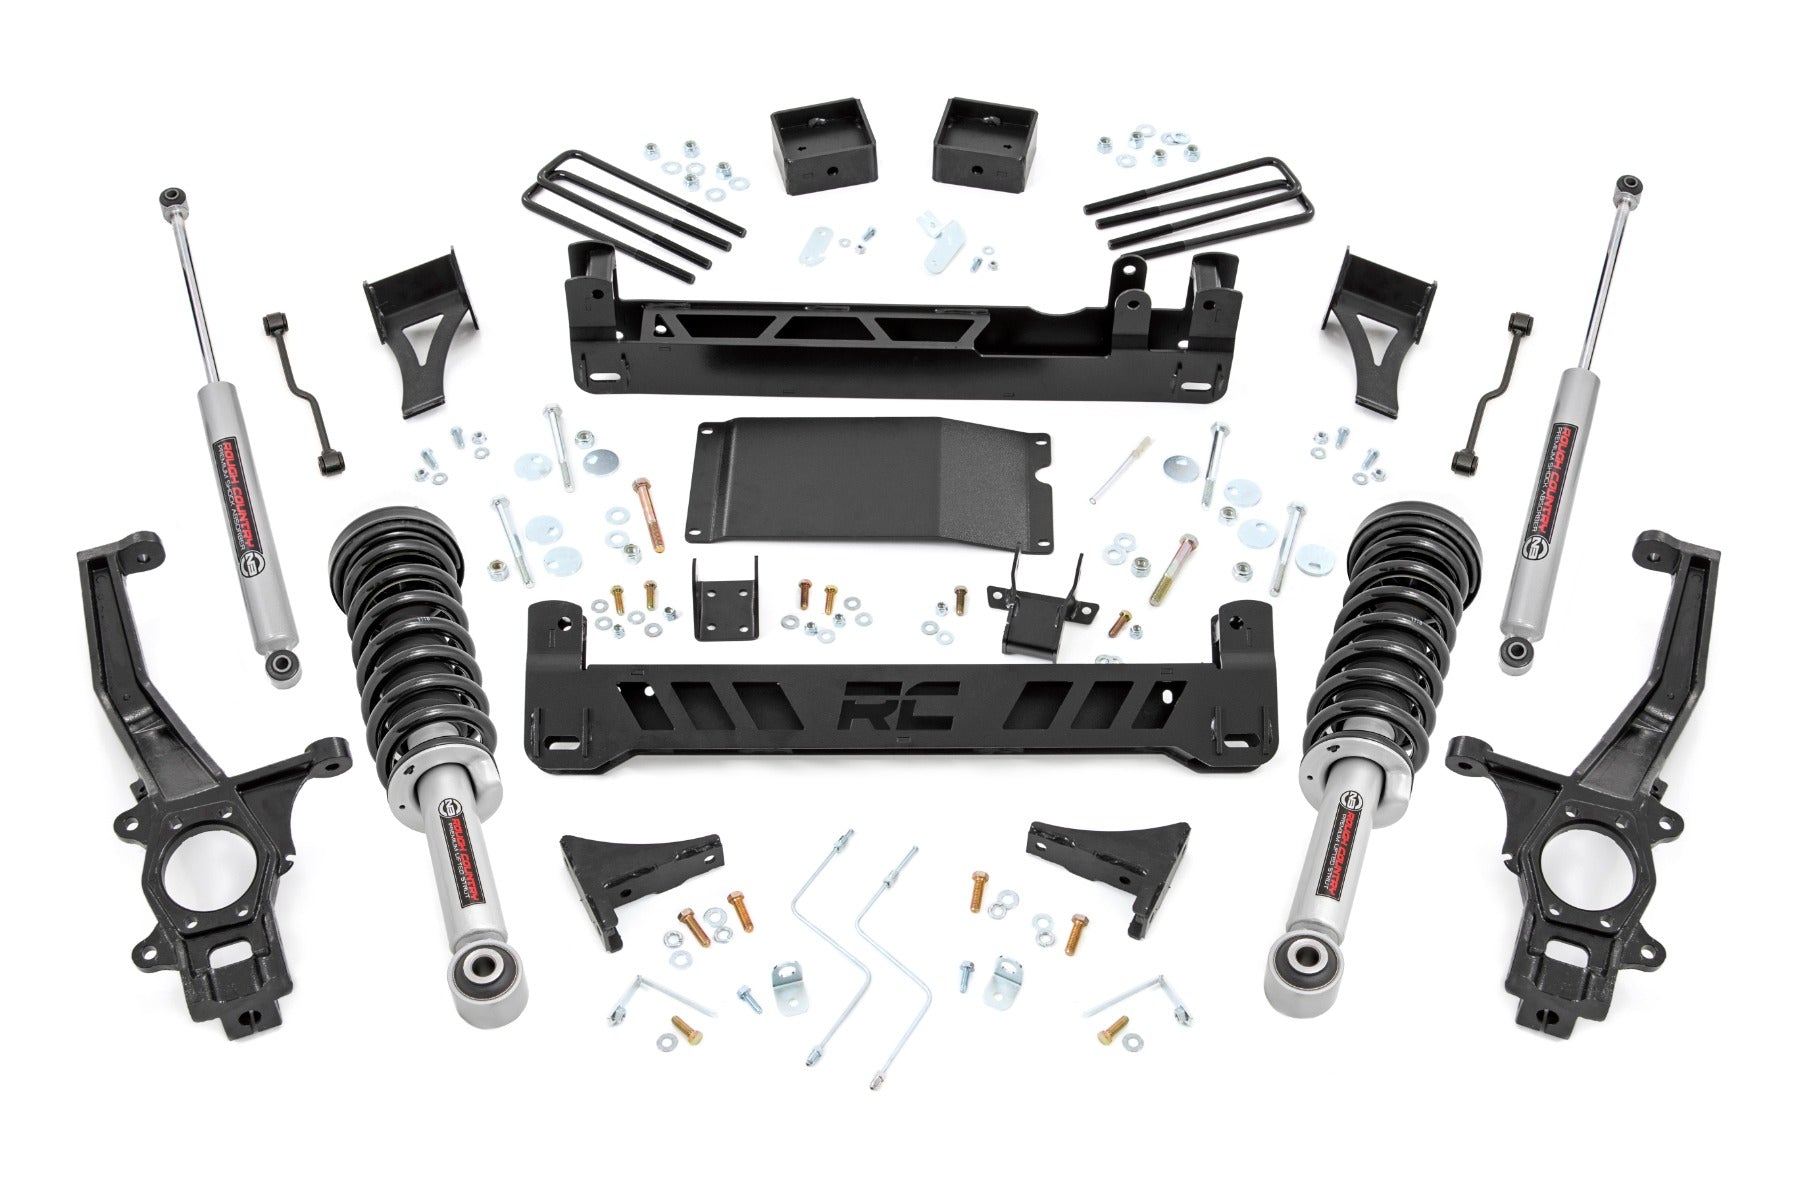 6 Inch Lift Kit with N3 Struts 22 Nissan Frontier 2WD/4WD Rough Country